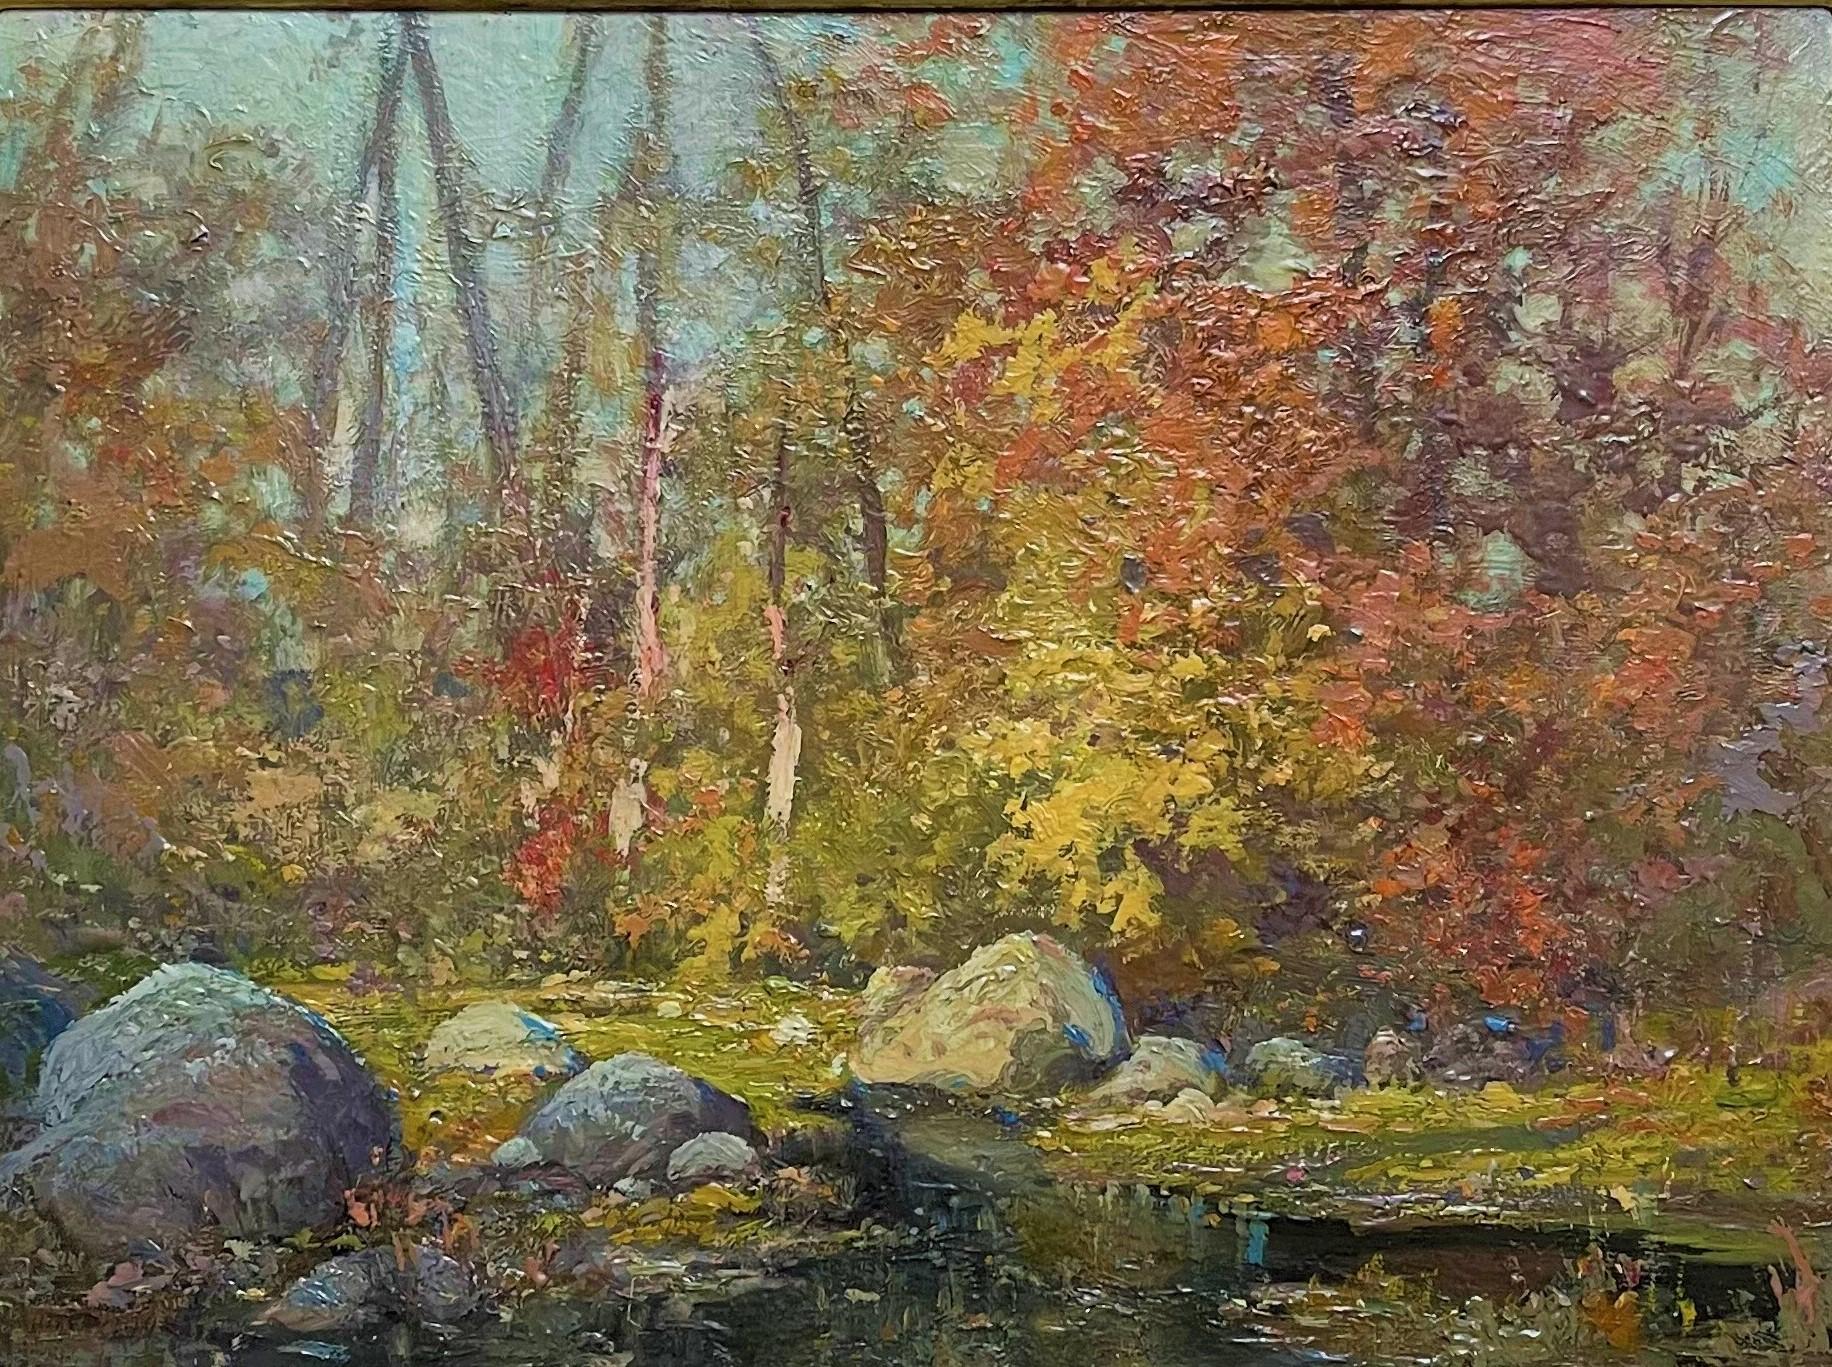 Rocks & Trees
Oil/Board
12 x 16 image unframed, 18.75 x 22.75 framed
Signed lower left although hard to read.
No restoration housed in a reproduction frame.
The painting is in beautiful condition and is much softer in person that these photos